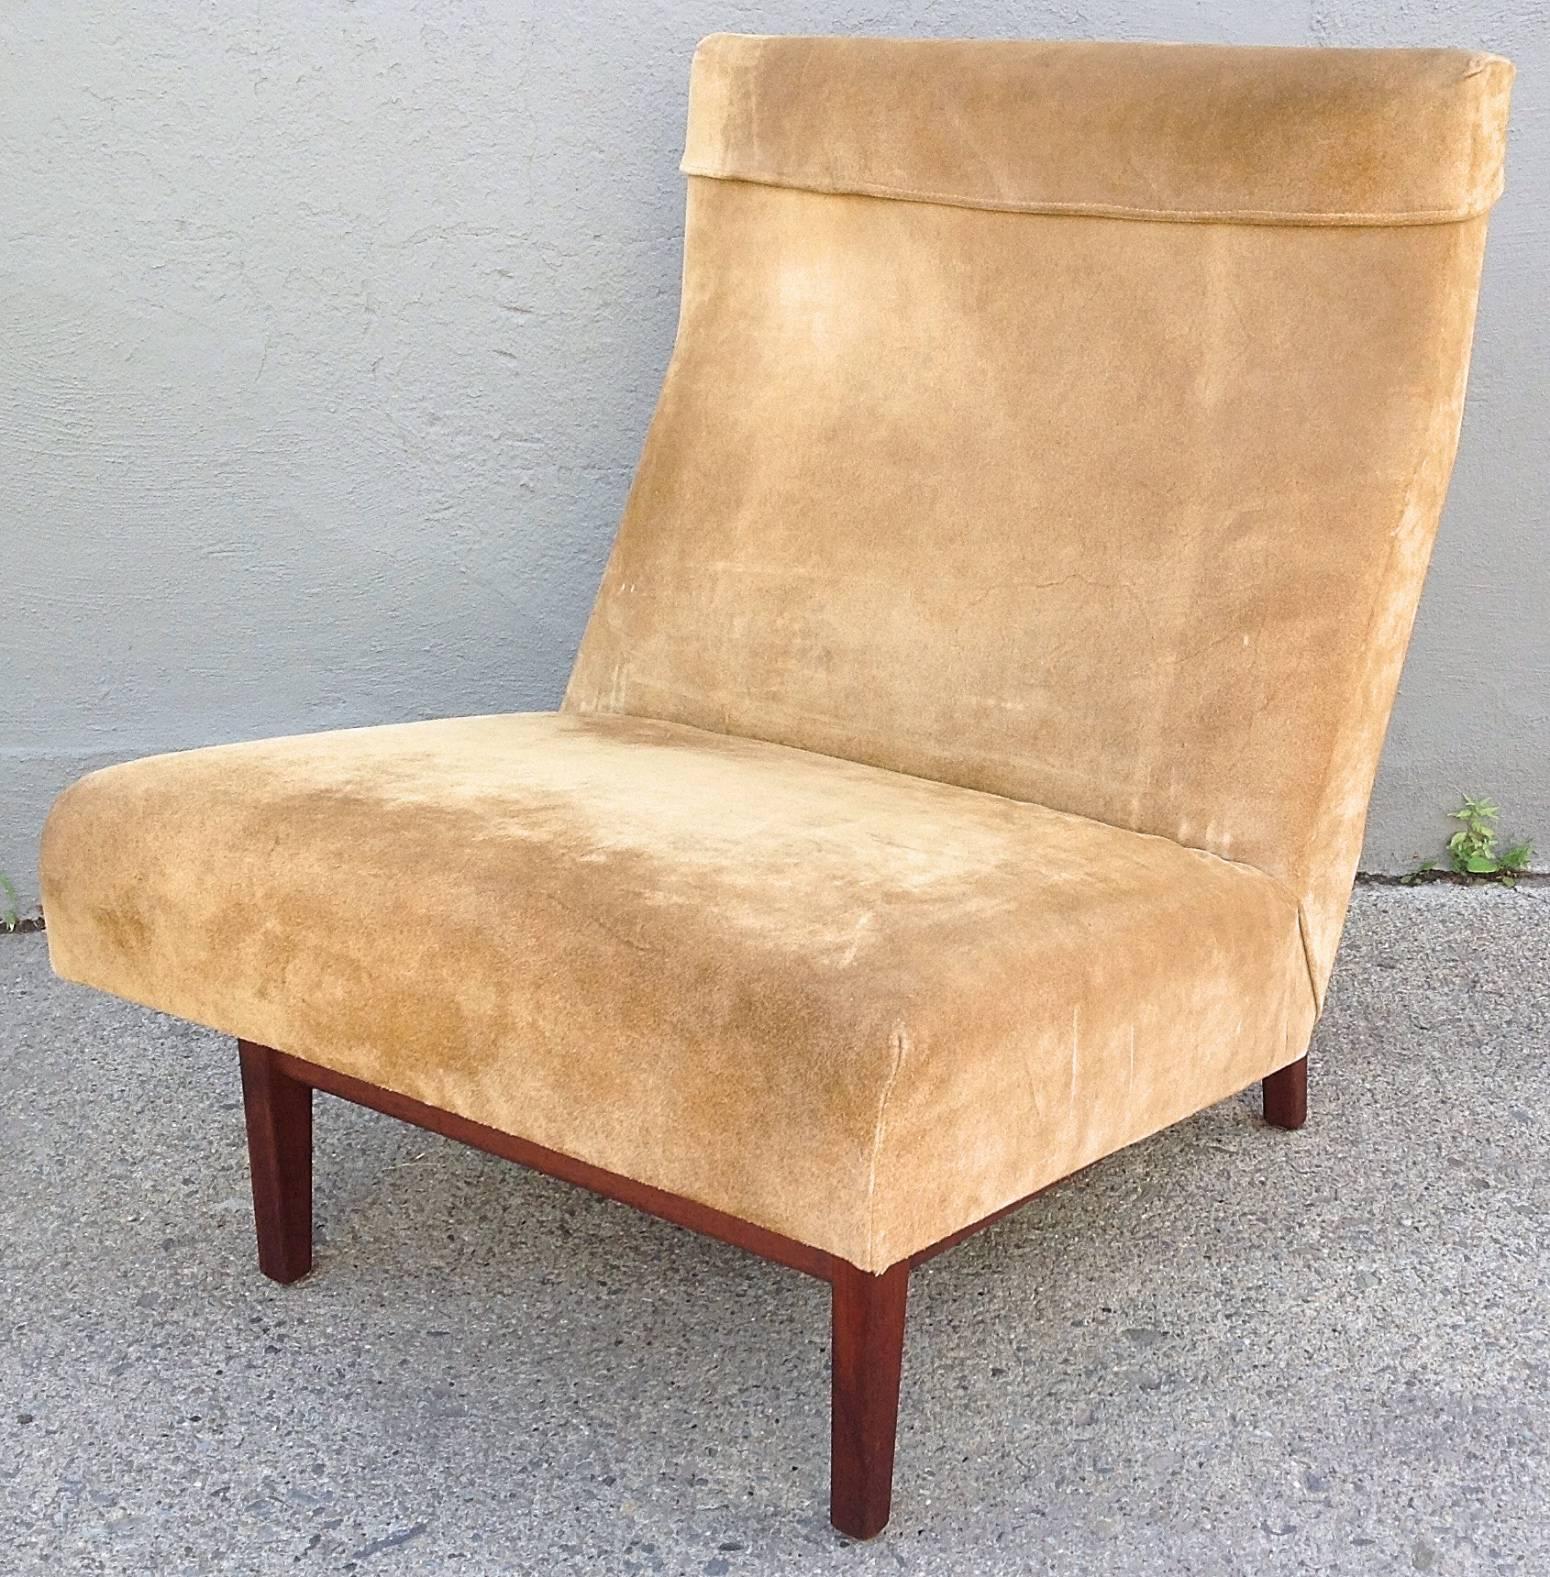 Mid-20th Century Jens Risom Slipper Chair in Suede and Walnut For Sale